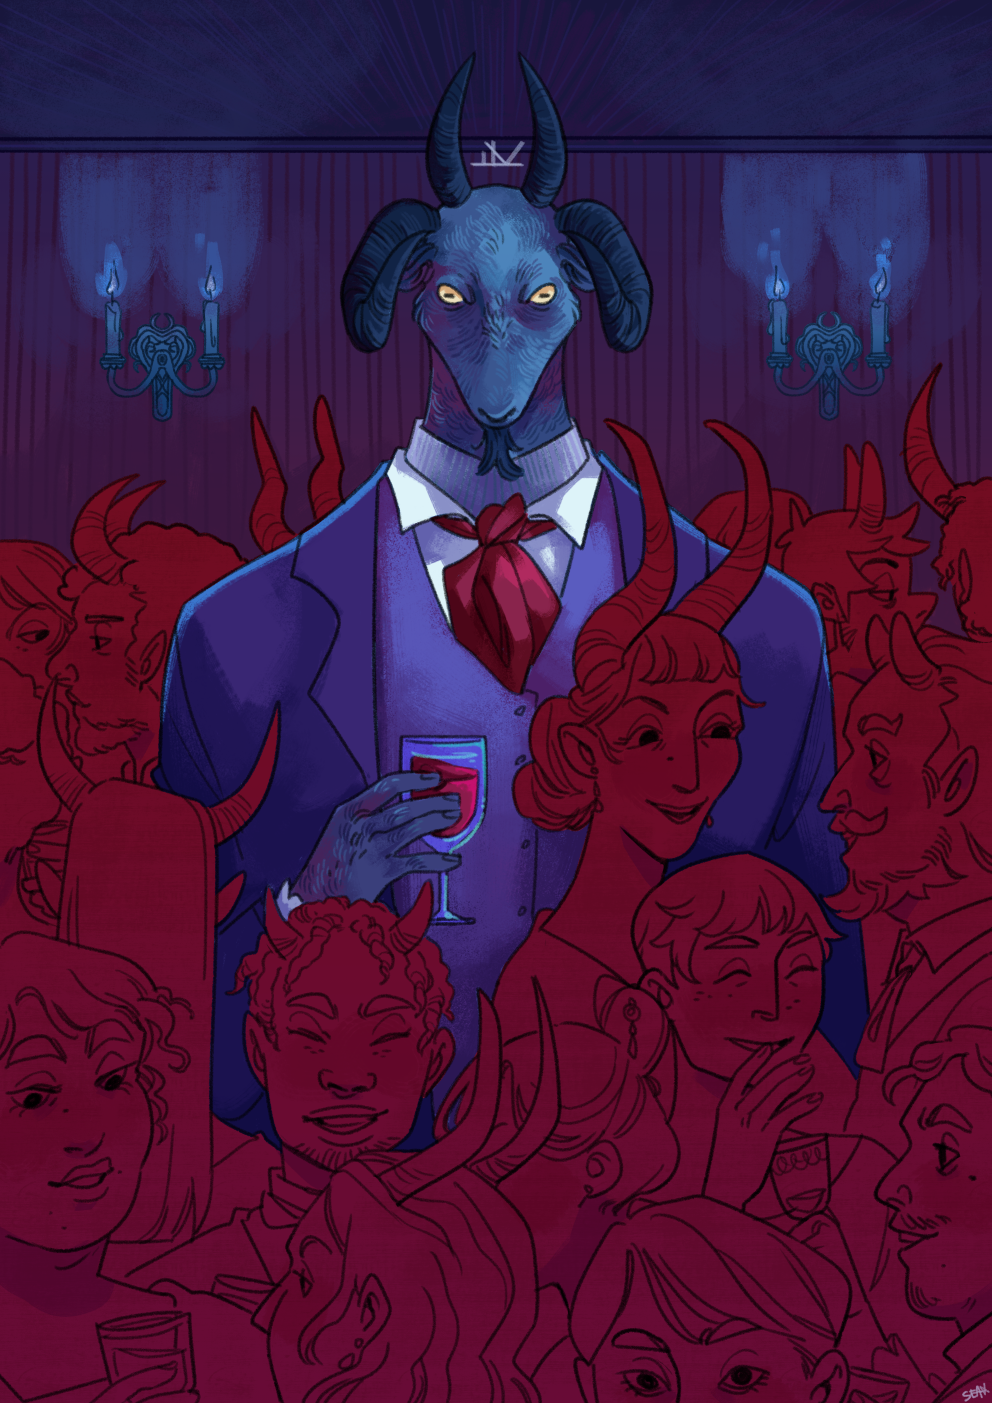 Pickman stands, dressed in a nice suit, in a crowd at a fancy Zevunzolia party. She is a head taller and much wider than everyone else.